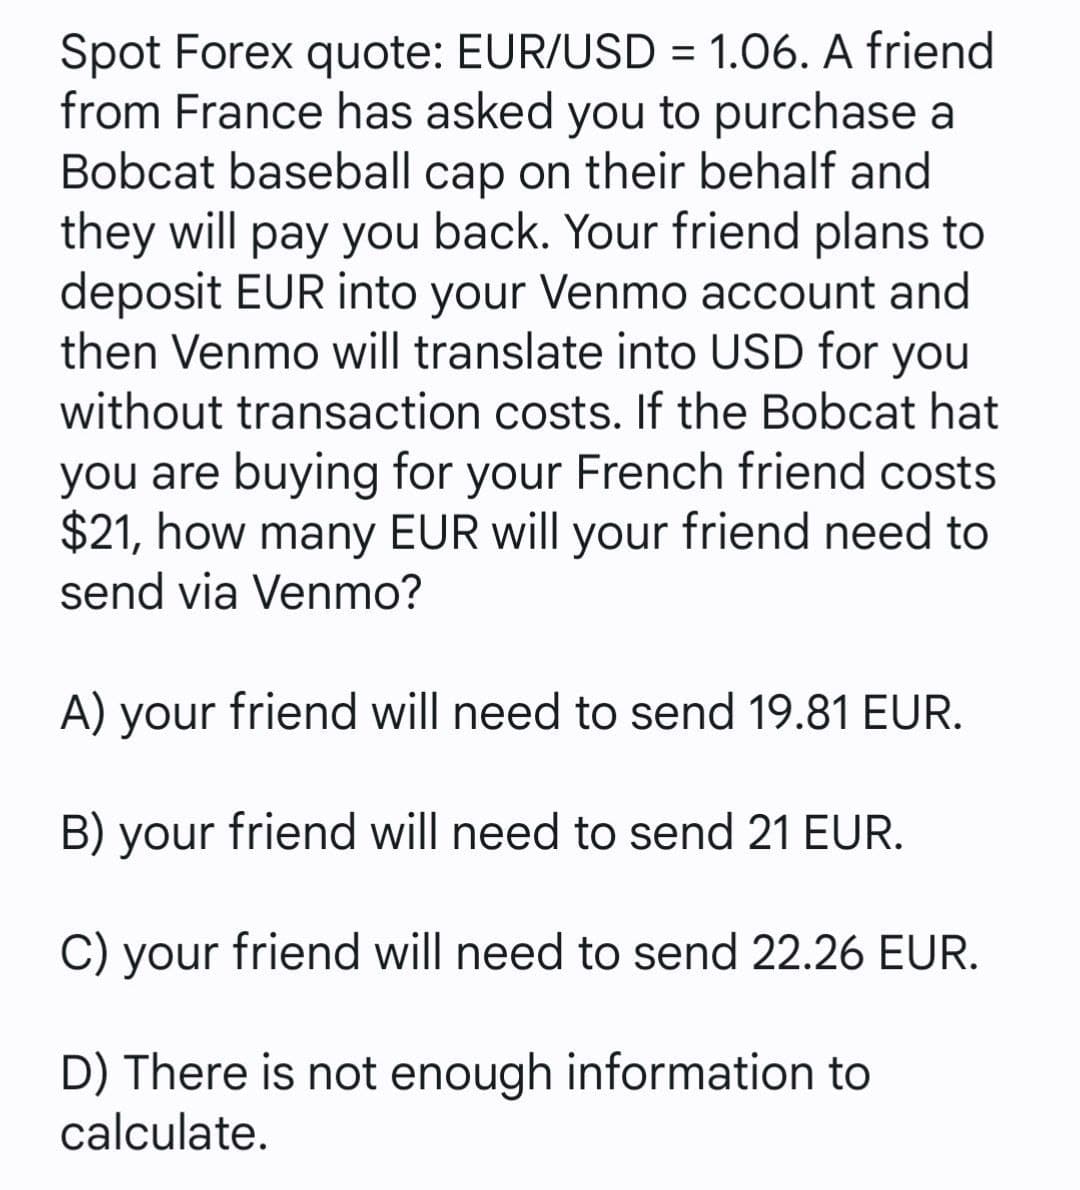 Spot Forex quote: EUR/USD = 1.06. A friend
from France has asked you to purchase a
Bobcat baseball cap on their behalf and
they will pay you back. Your friend plans to
deposit EUR into your Venmo account and
then Venmo will translate into USD for you
without transaction costs. If the Bobcat hat
you are buying for your French friend costs
$21, how many EUR will your friend need to
send via Venmo?
A) your friend will need to send 19.81 EUR.
B) your friend will need to send 21 EUR.
C) your friend will need to send 22.26 EUR.
D) There is not enough information to
calculate.
